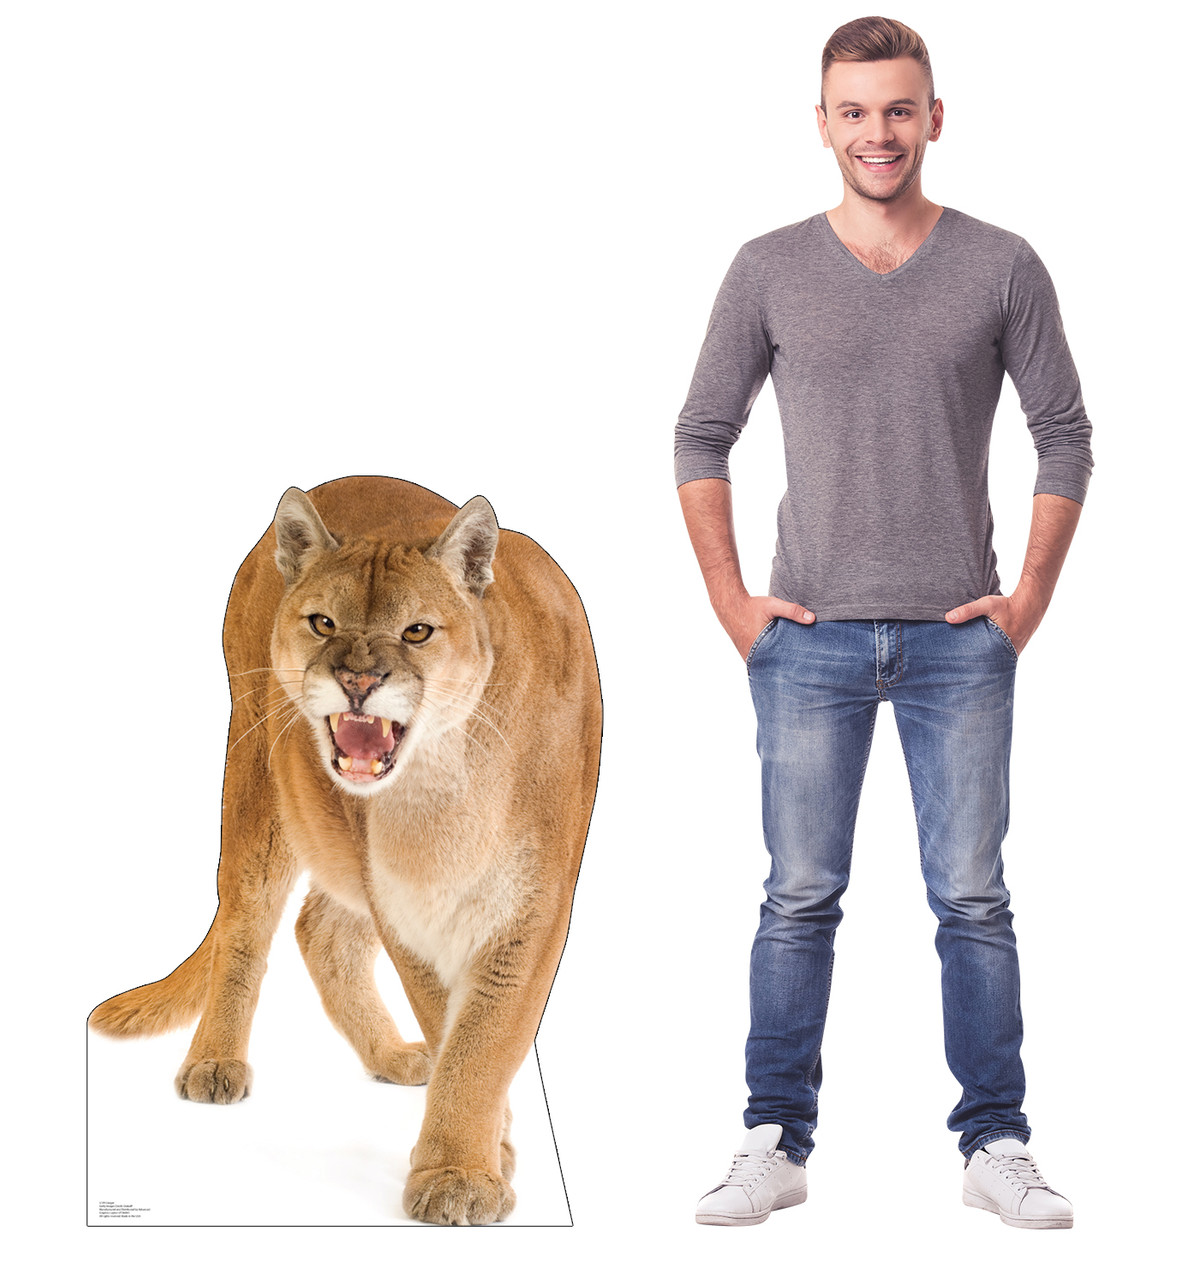 Life-size cardboard standee of a Cougar with model.